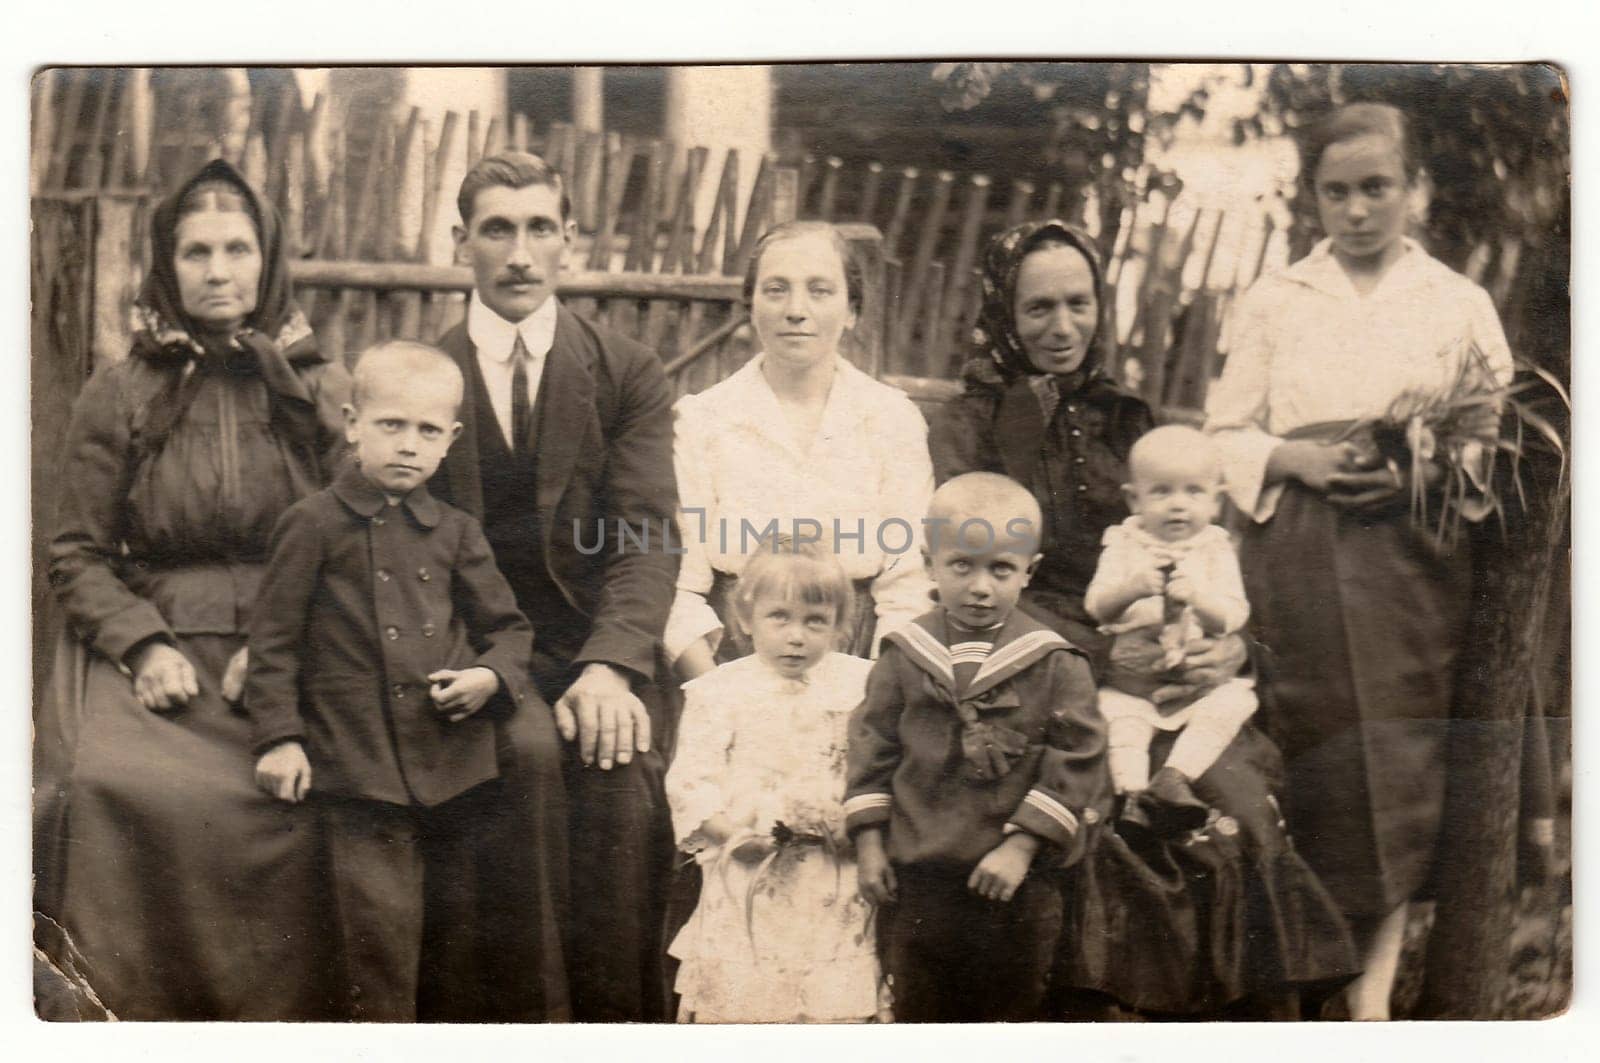 THE CZECHOSLOVAK REPUBLIC - CIRCA 1930s: Vintage photo shows a big rural family in front of wooden fence. Black & white antique photography.